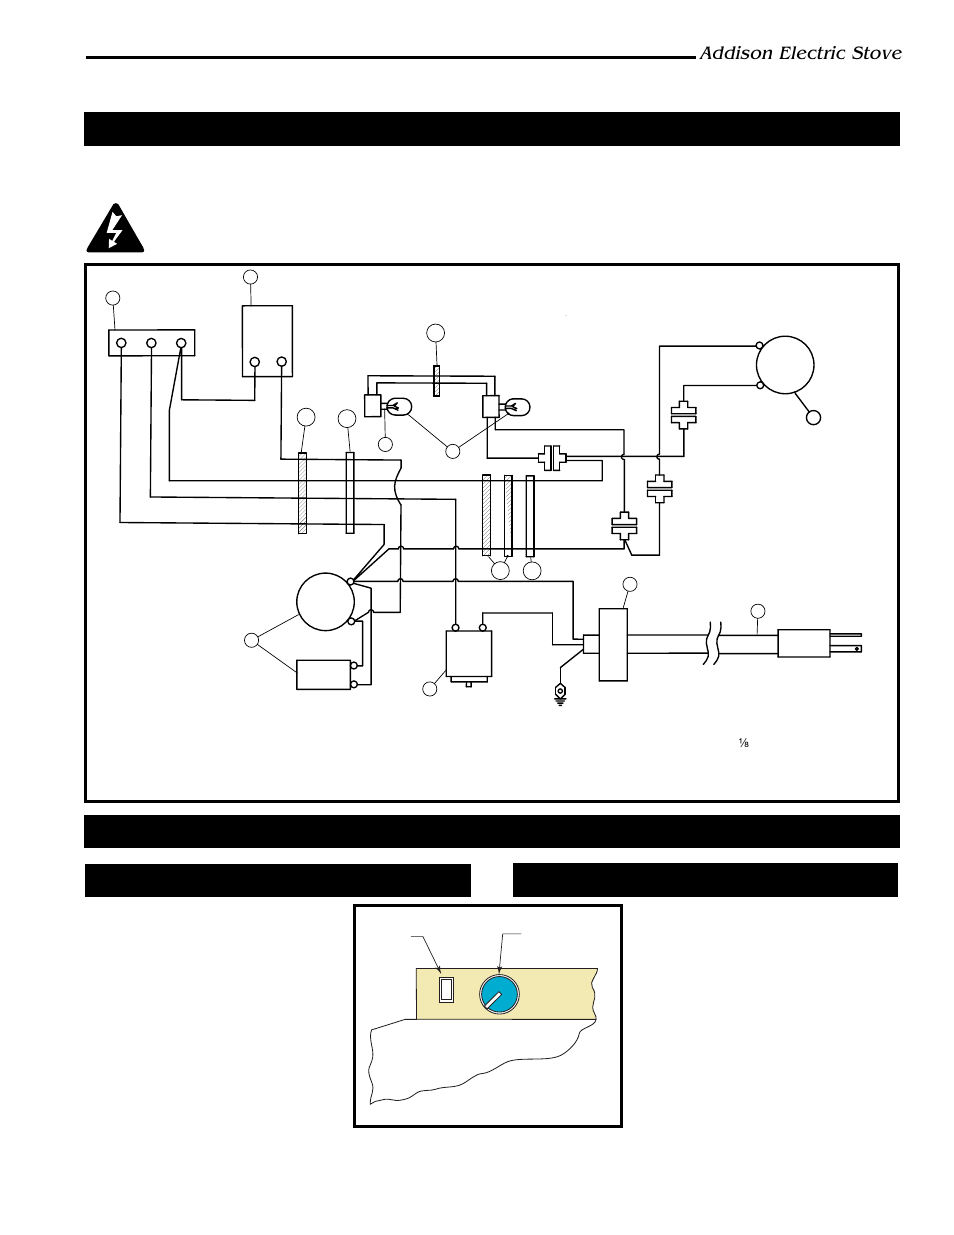 Electrical wiring diagram operating instructions, Addison electric stove, Main on/off switch | Heater control | Vermont Casting ACSB User Manual | Page 7 / 10